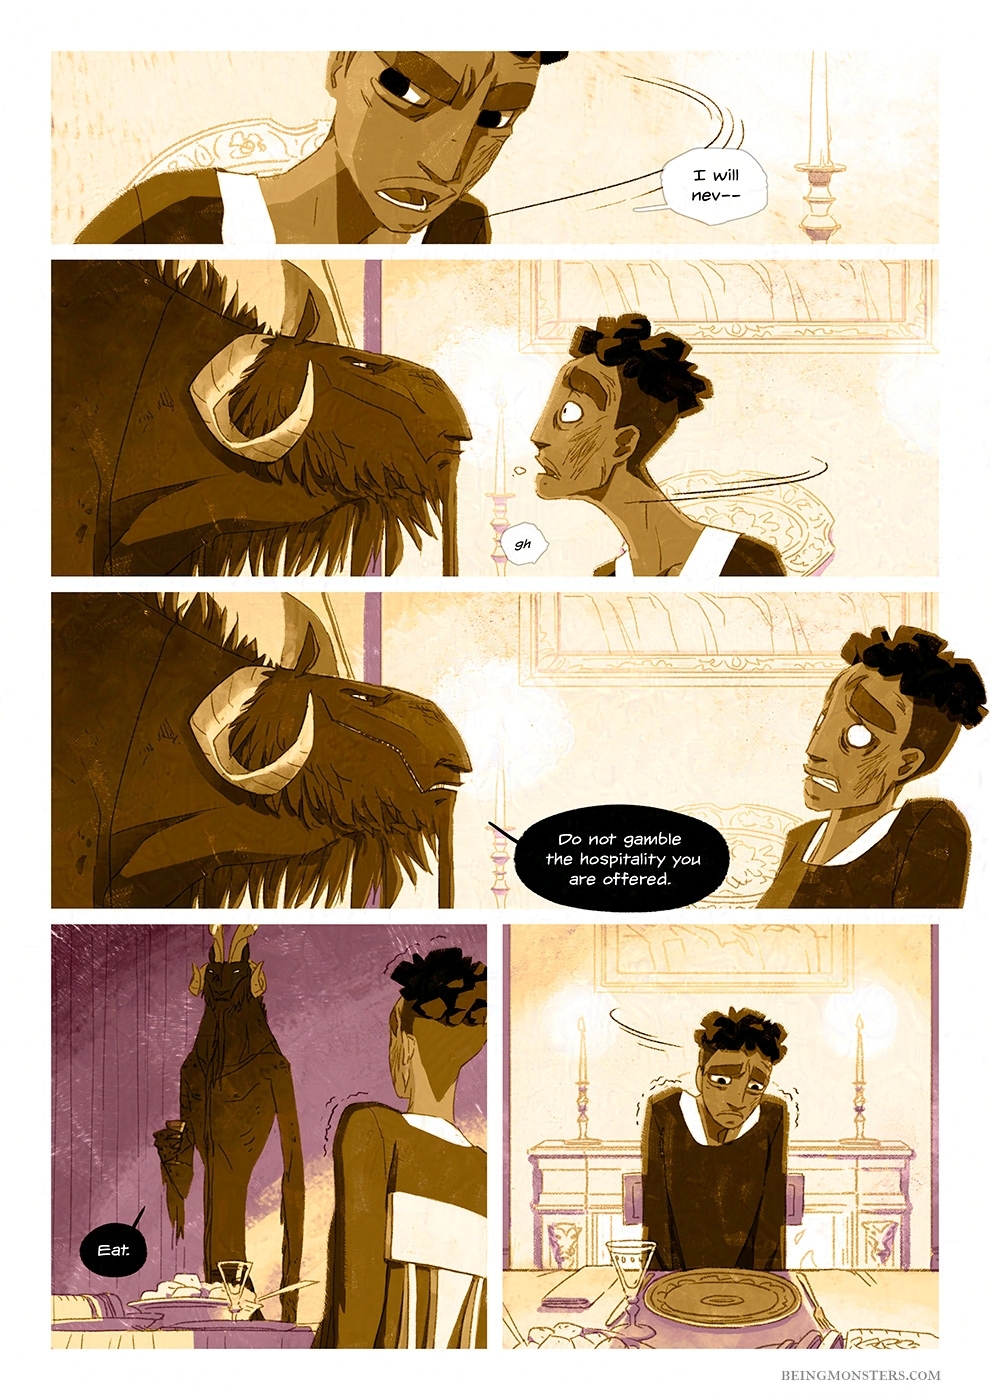 Being Monsters Book 2 Chapter 7 Page 16 EN